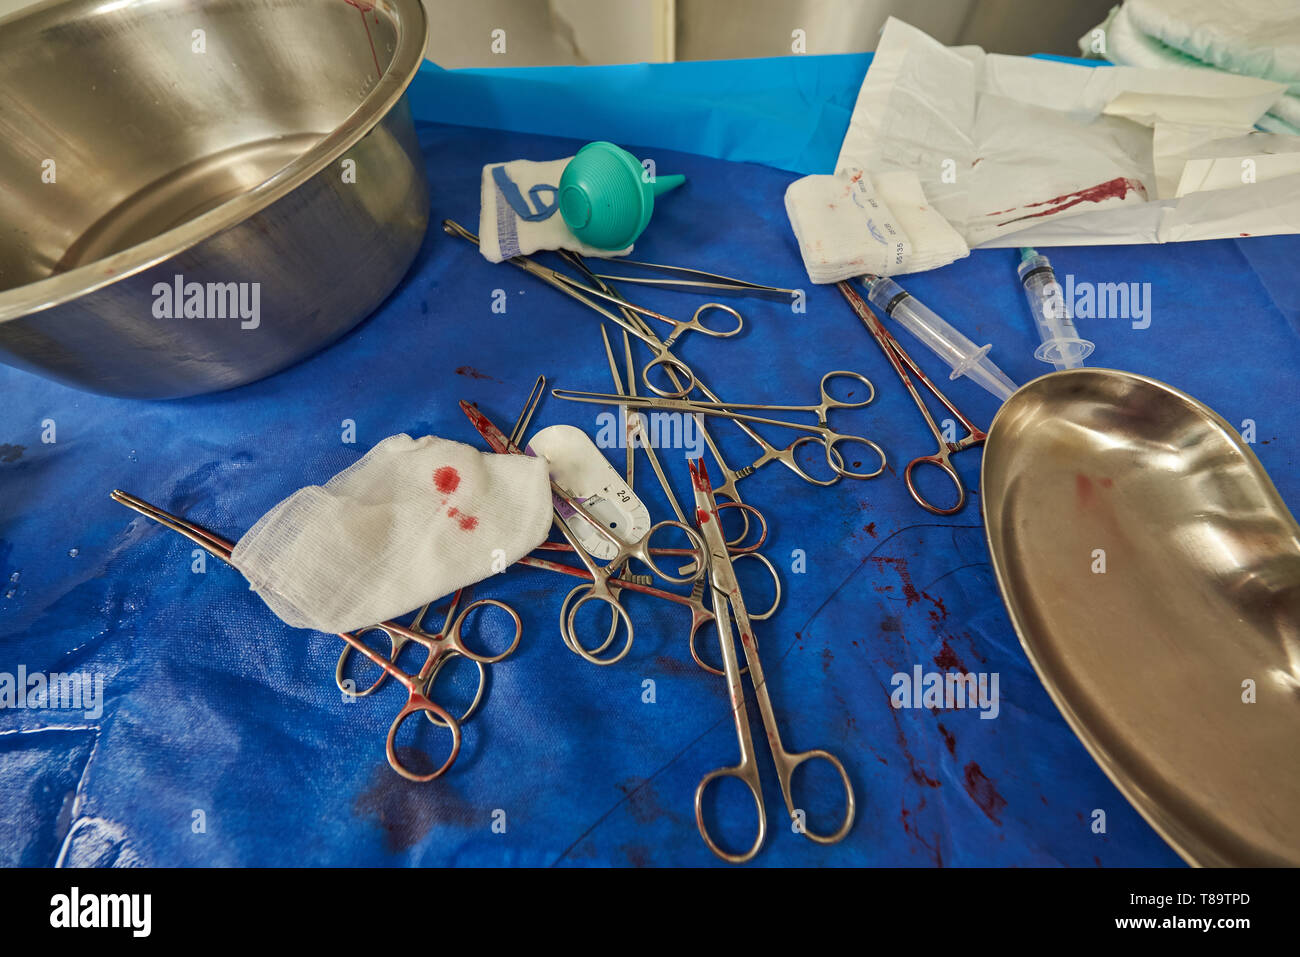 Dirty of blood medical table after operation. Surgery equipment on table Stock Photo